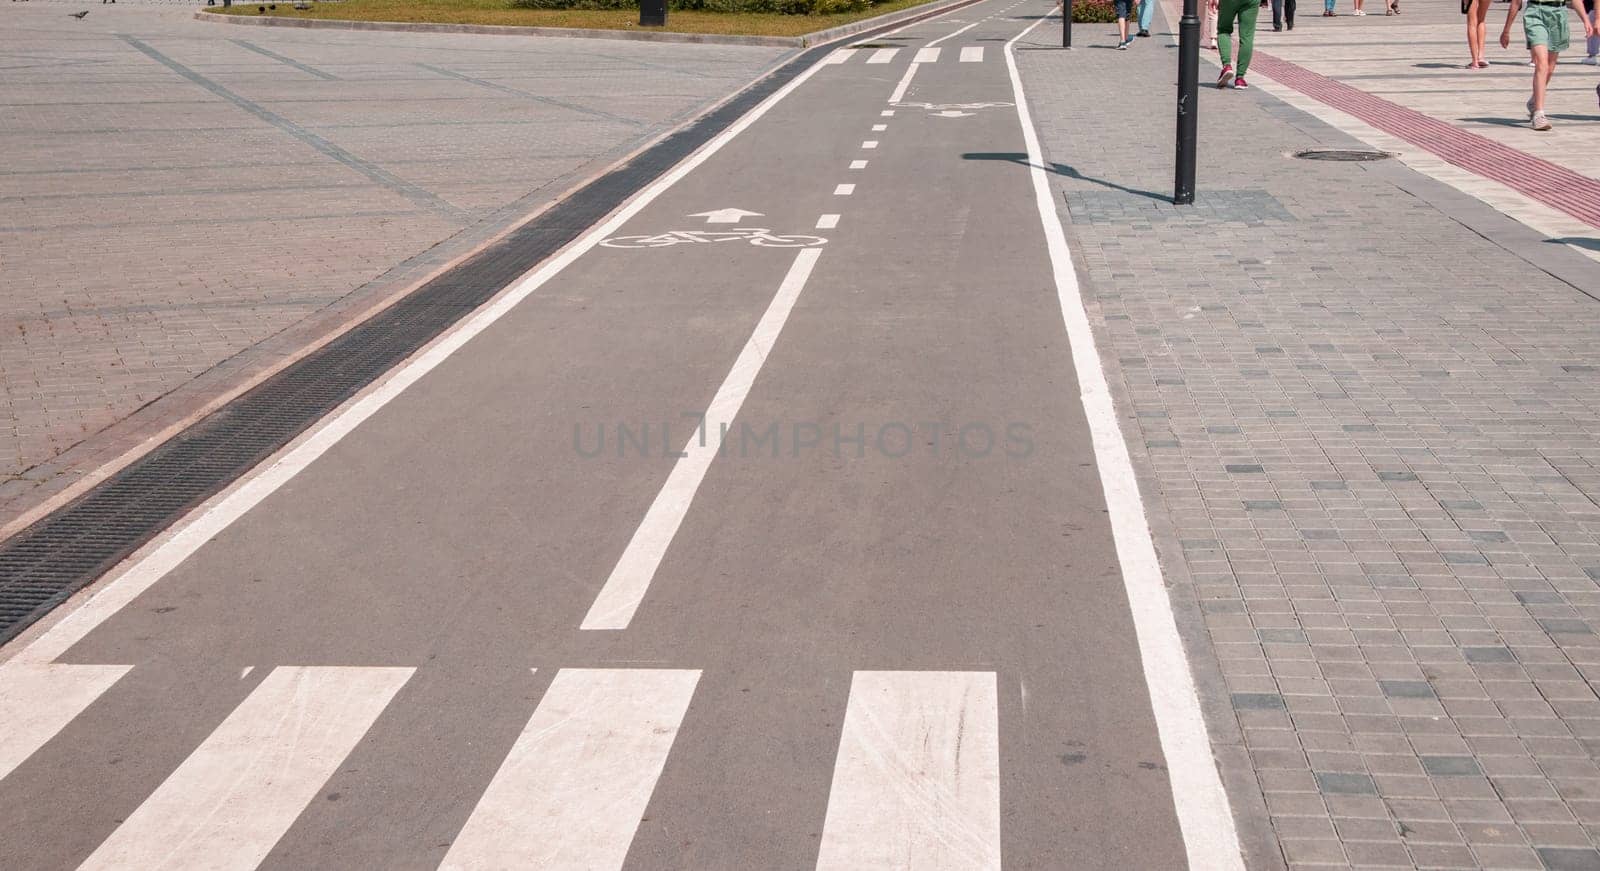 A sign of a bicycle path and pedestrian crossing on the asphalt in a city park, close-up by claire_lucia